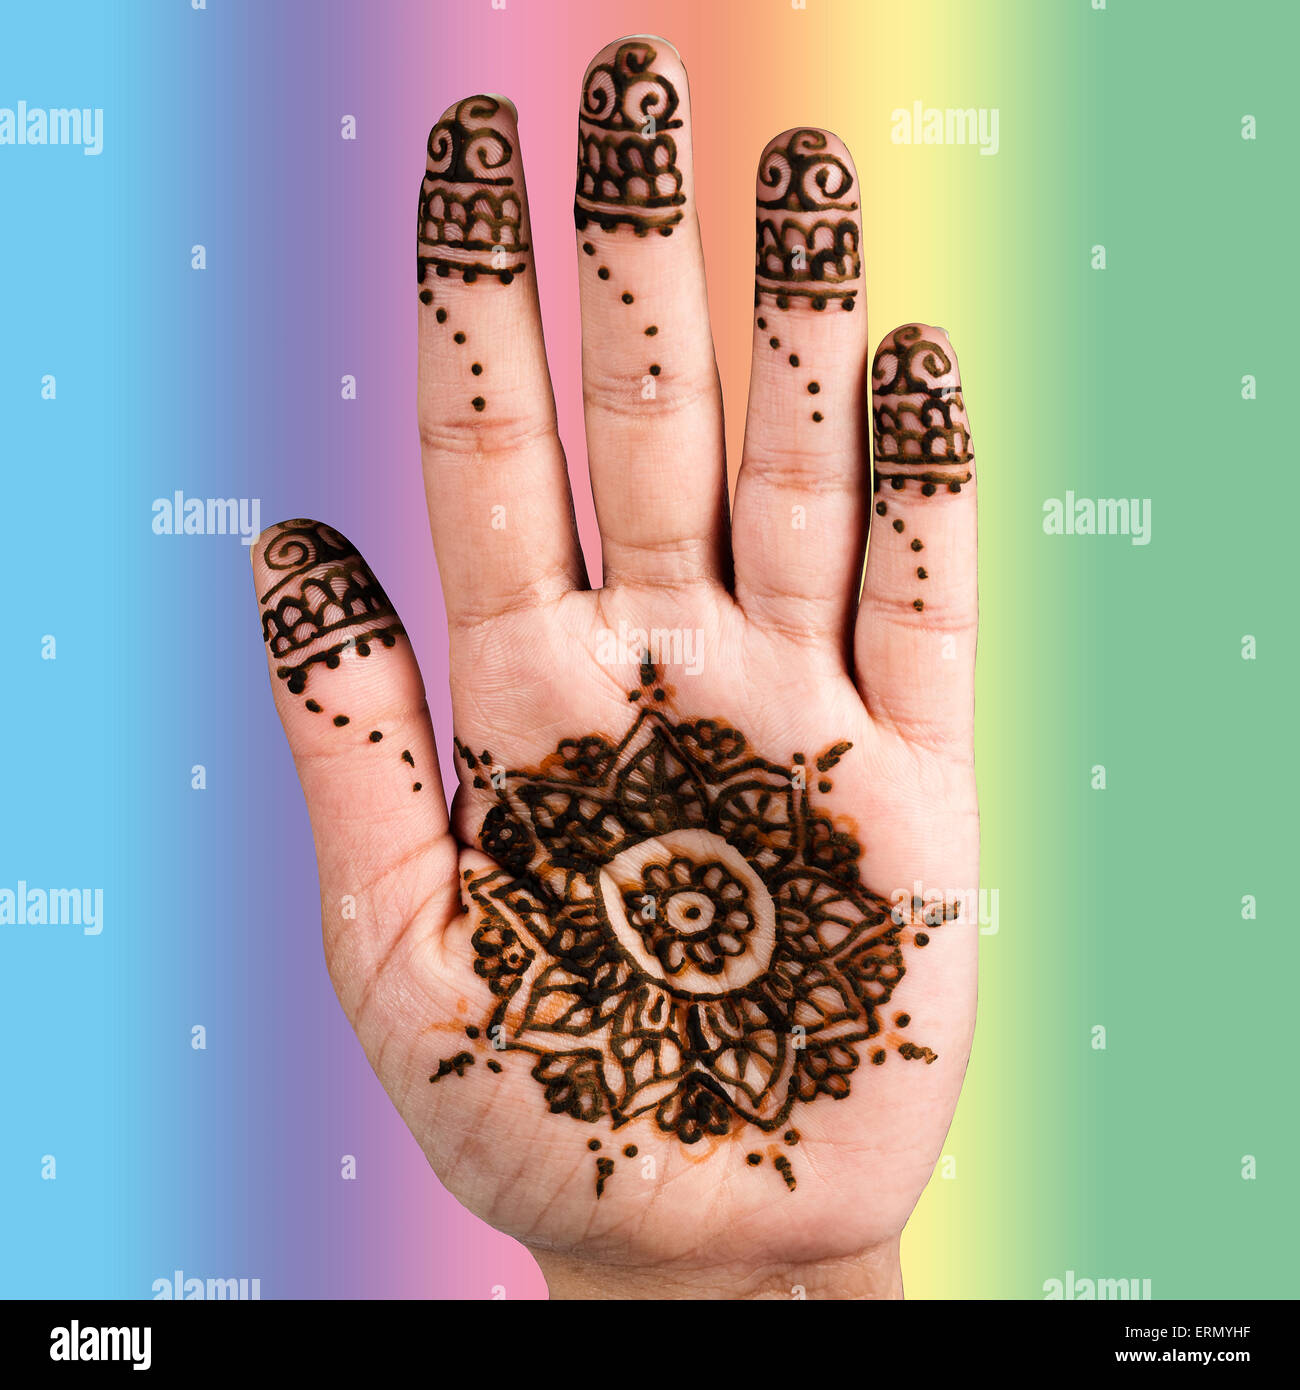 Buy 6 Colored Natural Henna Herbal Cones Instant Temporary Tattoo Body Art  Design Kit Mehandi Paste DIY Online in India - Etsy